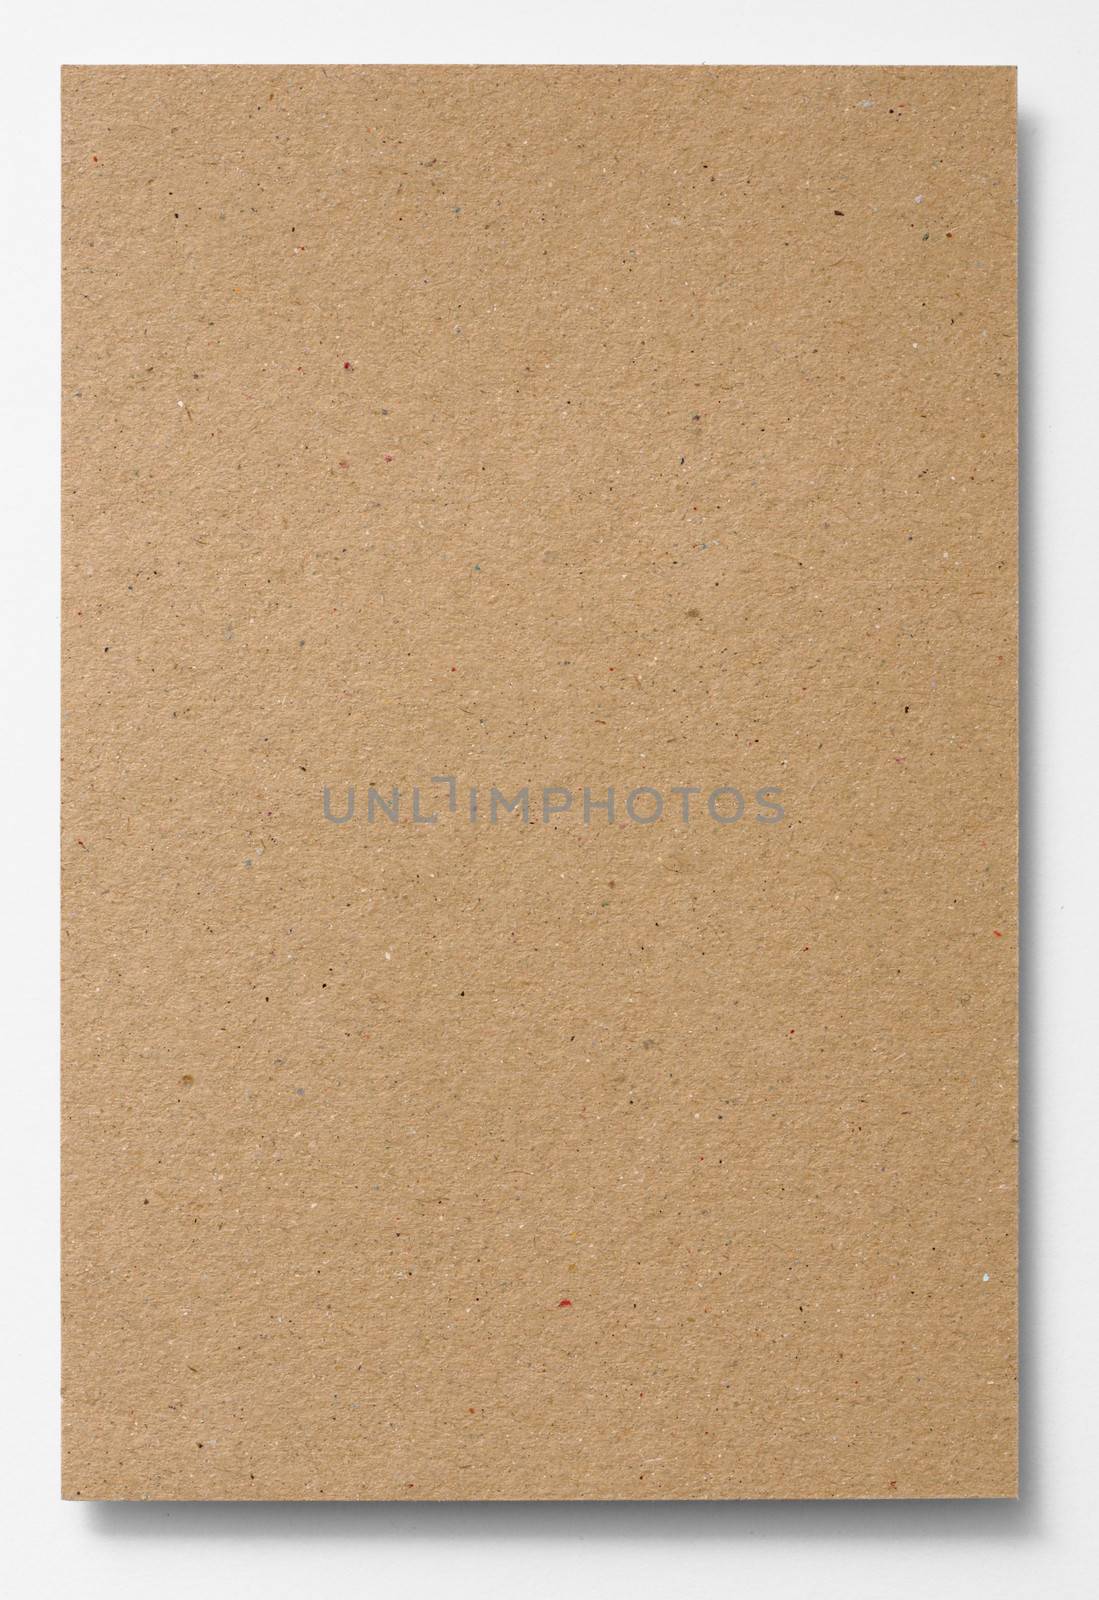 Brown Notepaper isolated on white